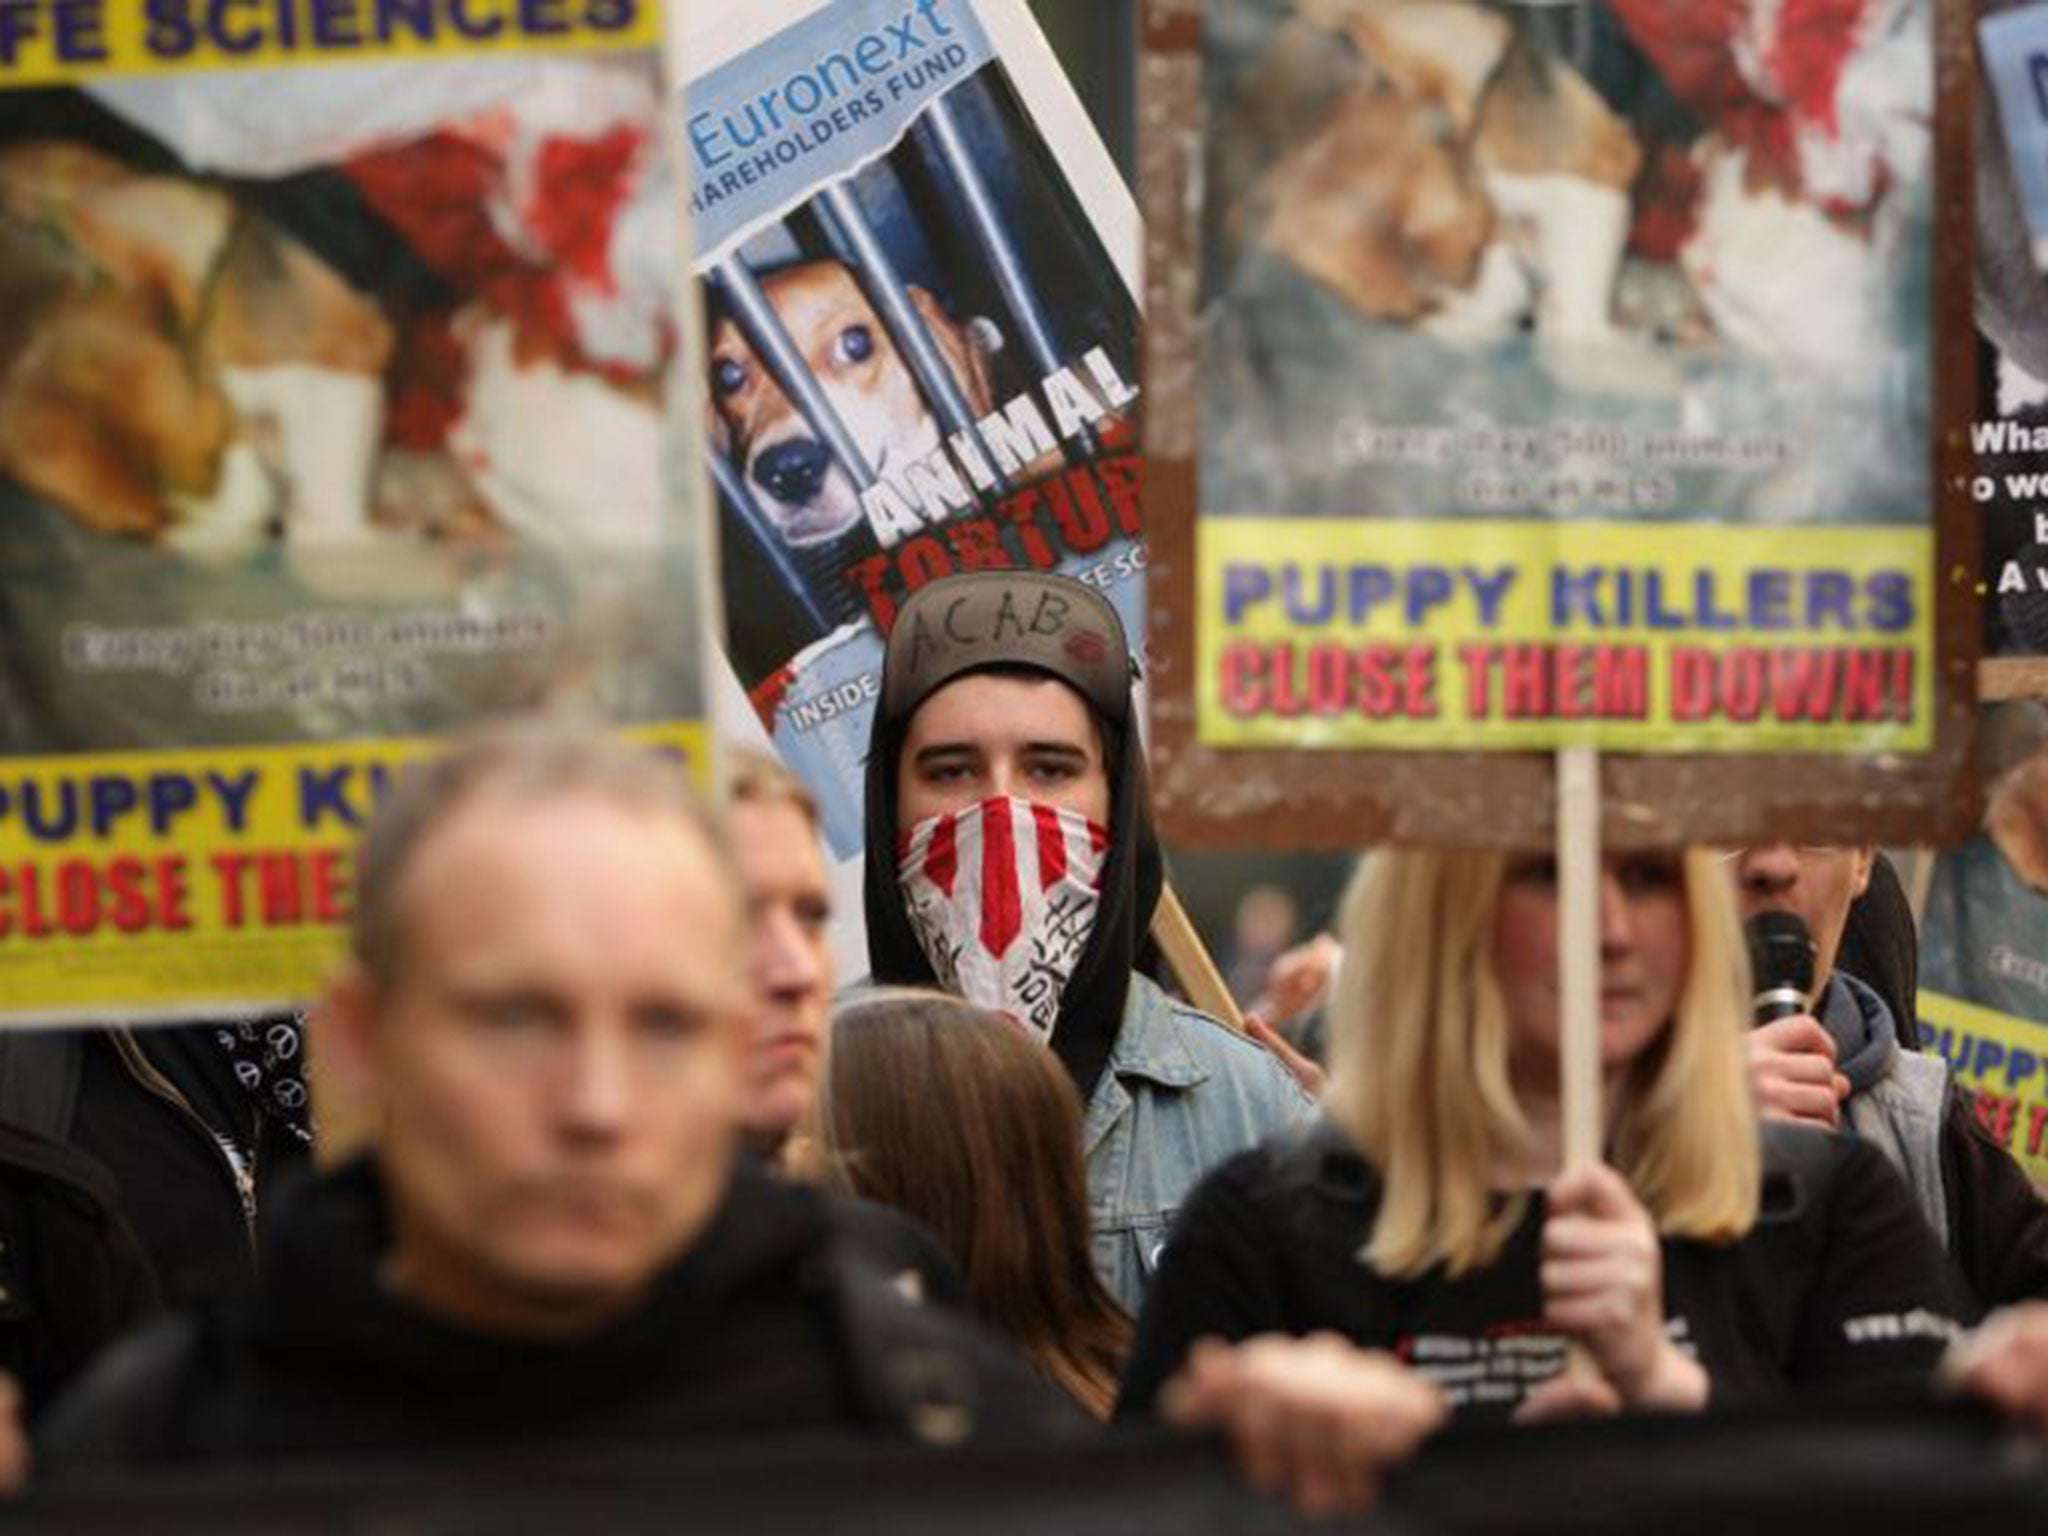 Anti-vivisection campaigners are now offering cash rewards for personal information about university students working on animal testing projects